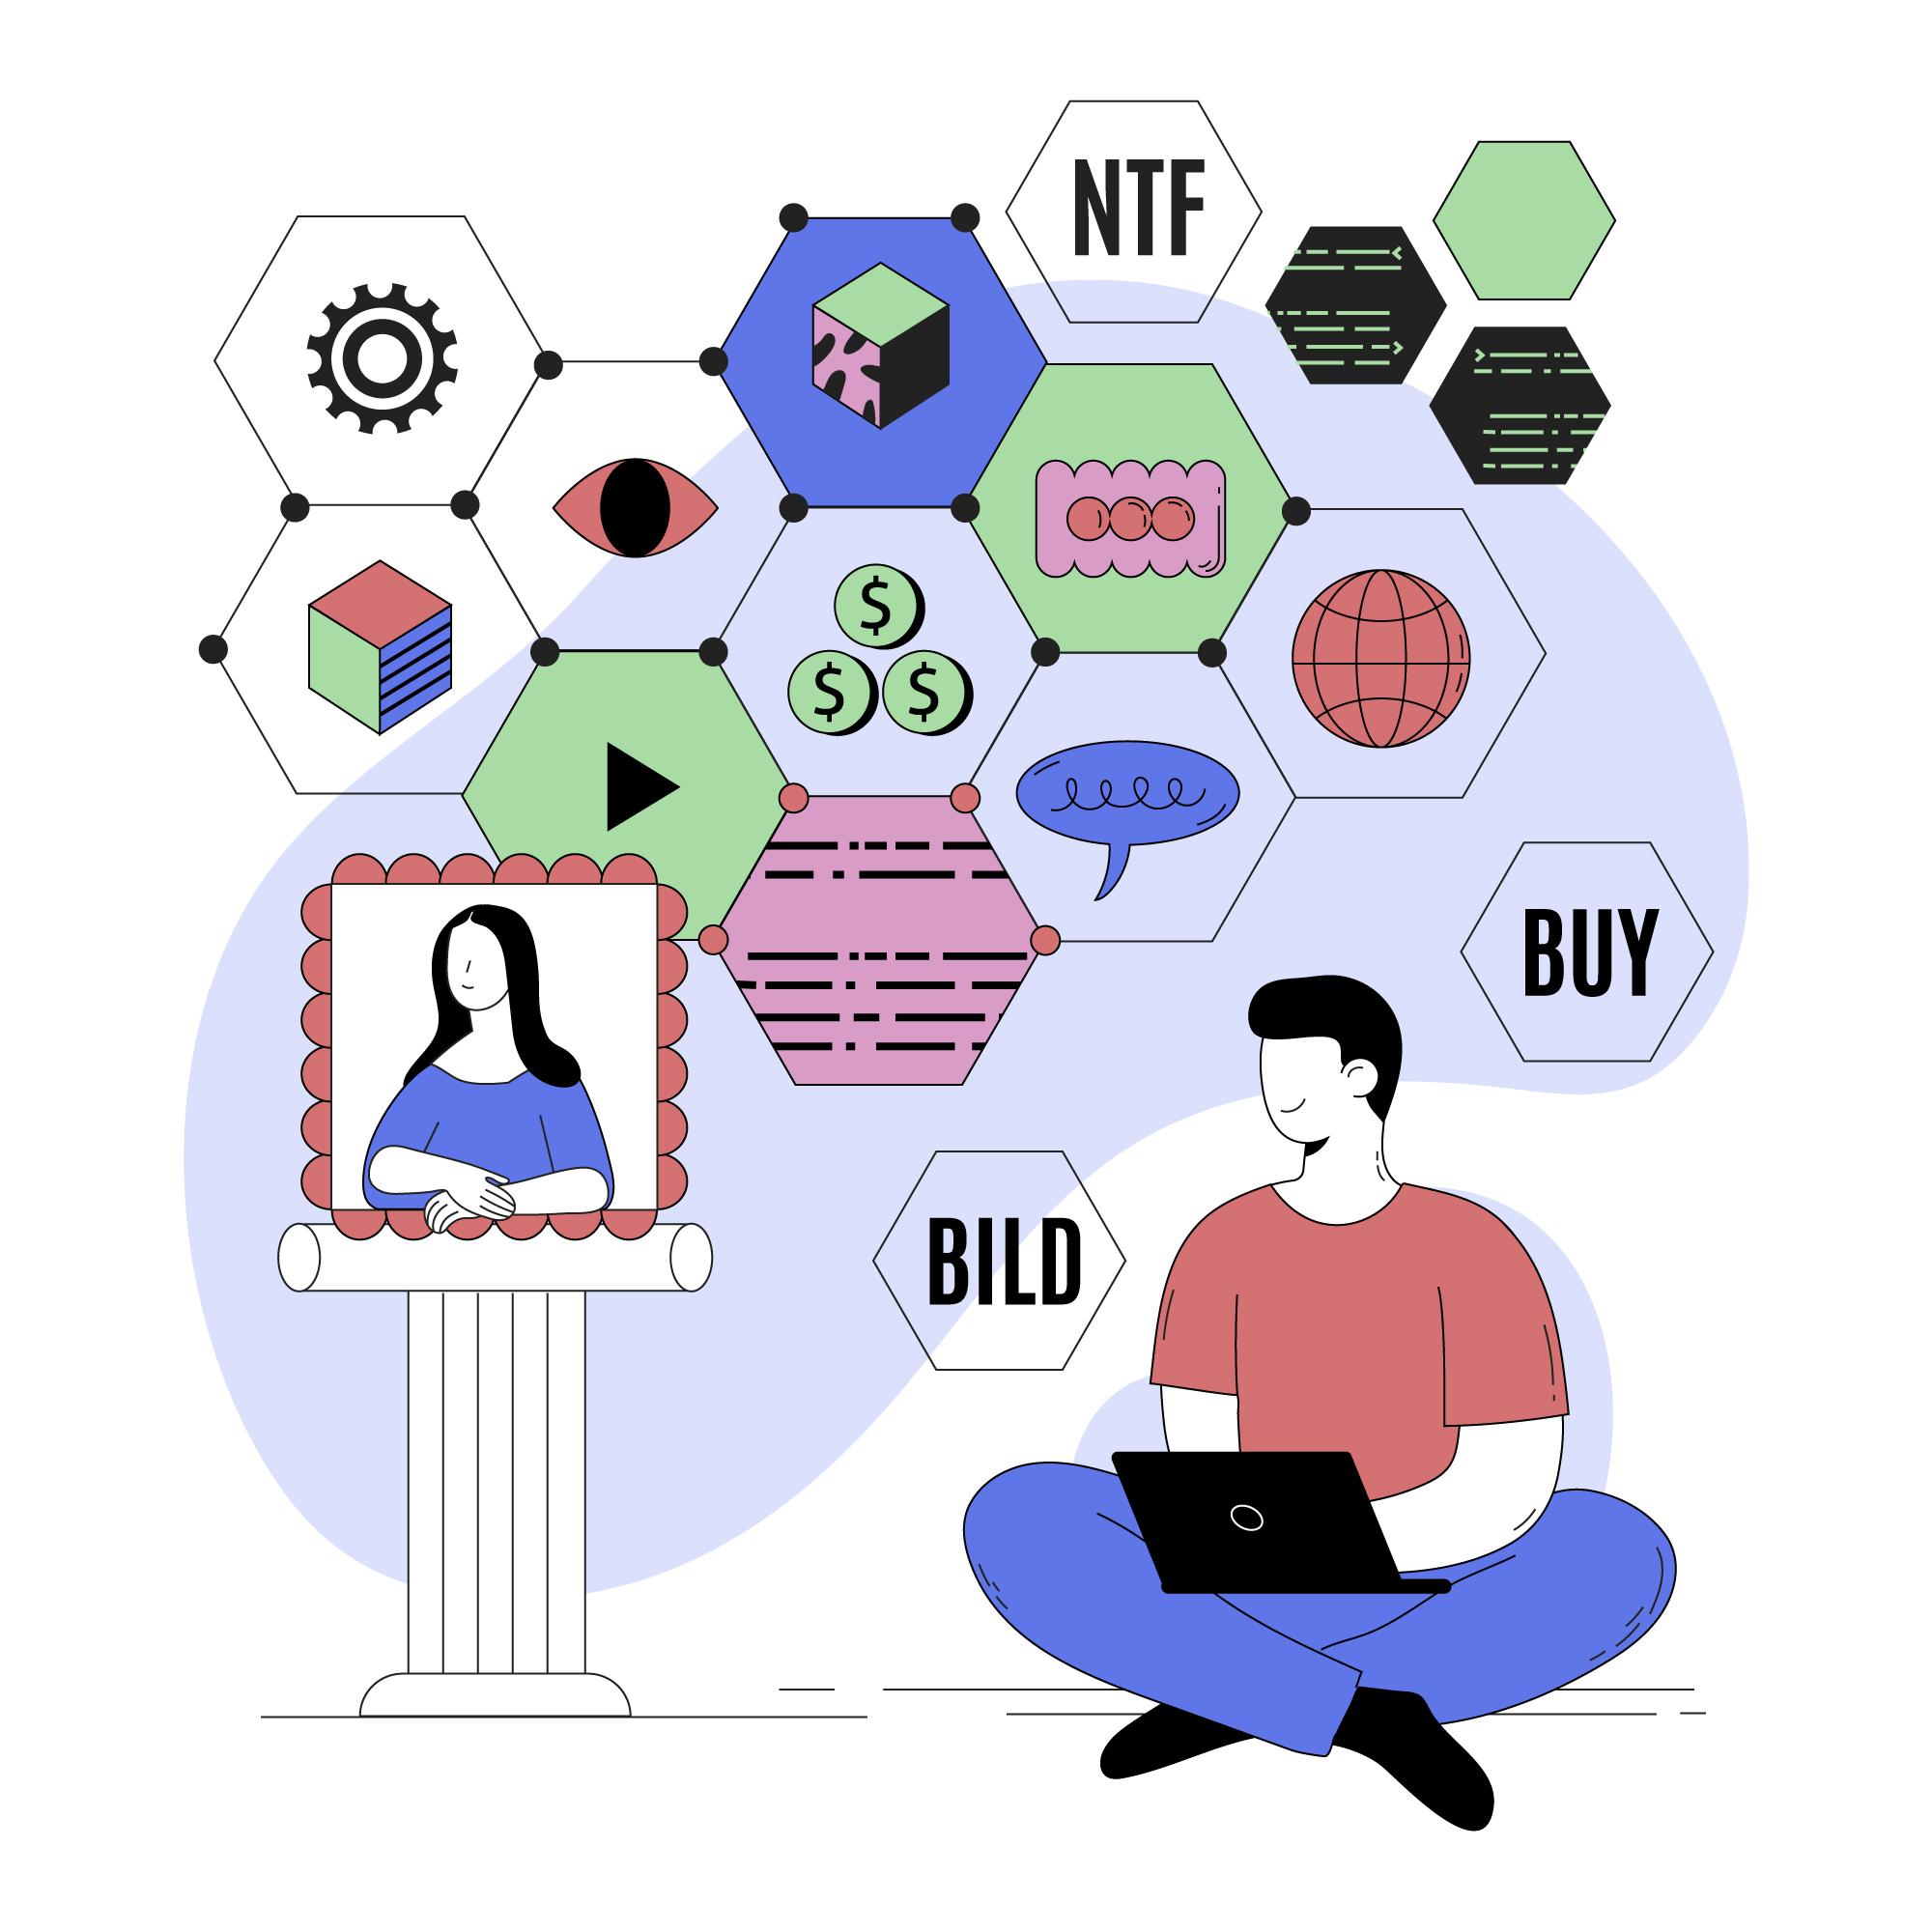 Key Features of the White-Label NFT Marketplace